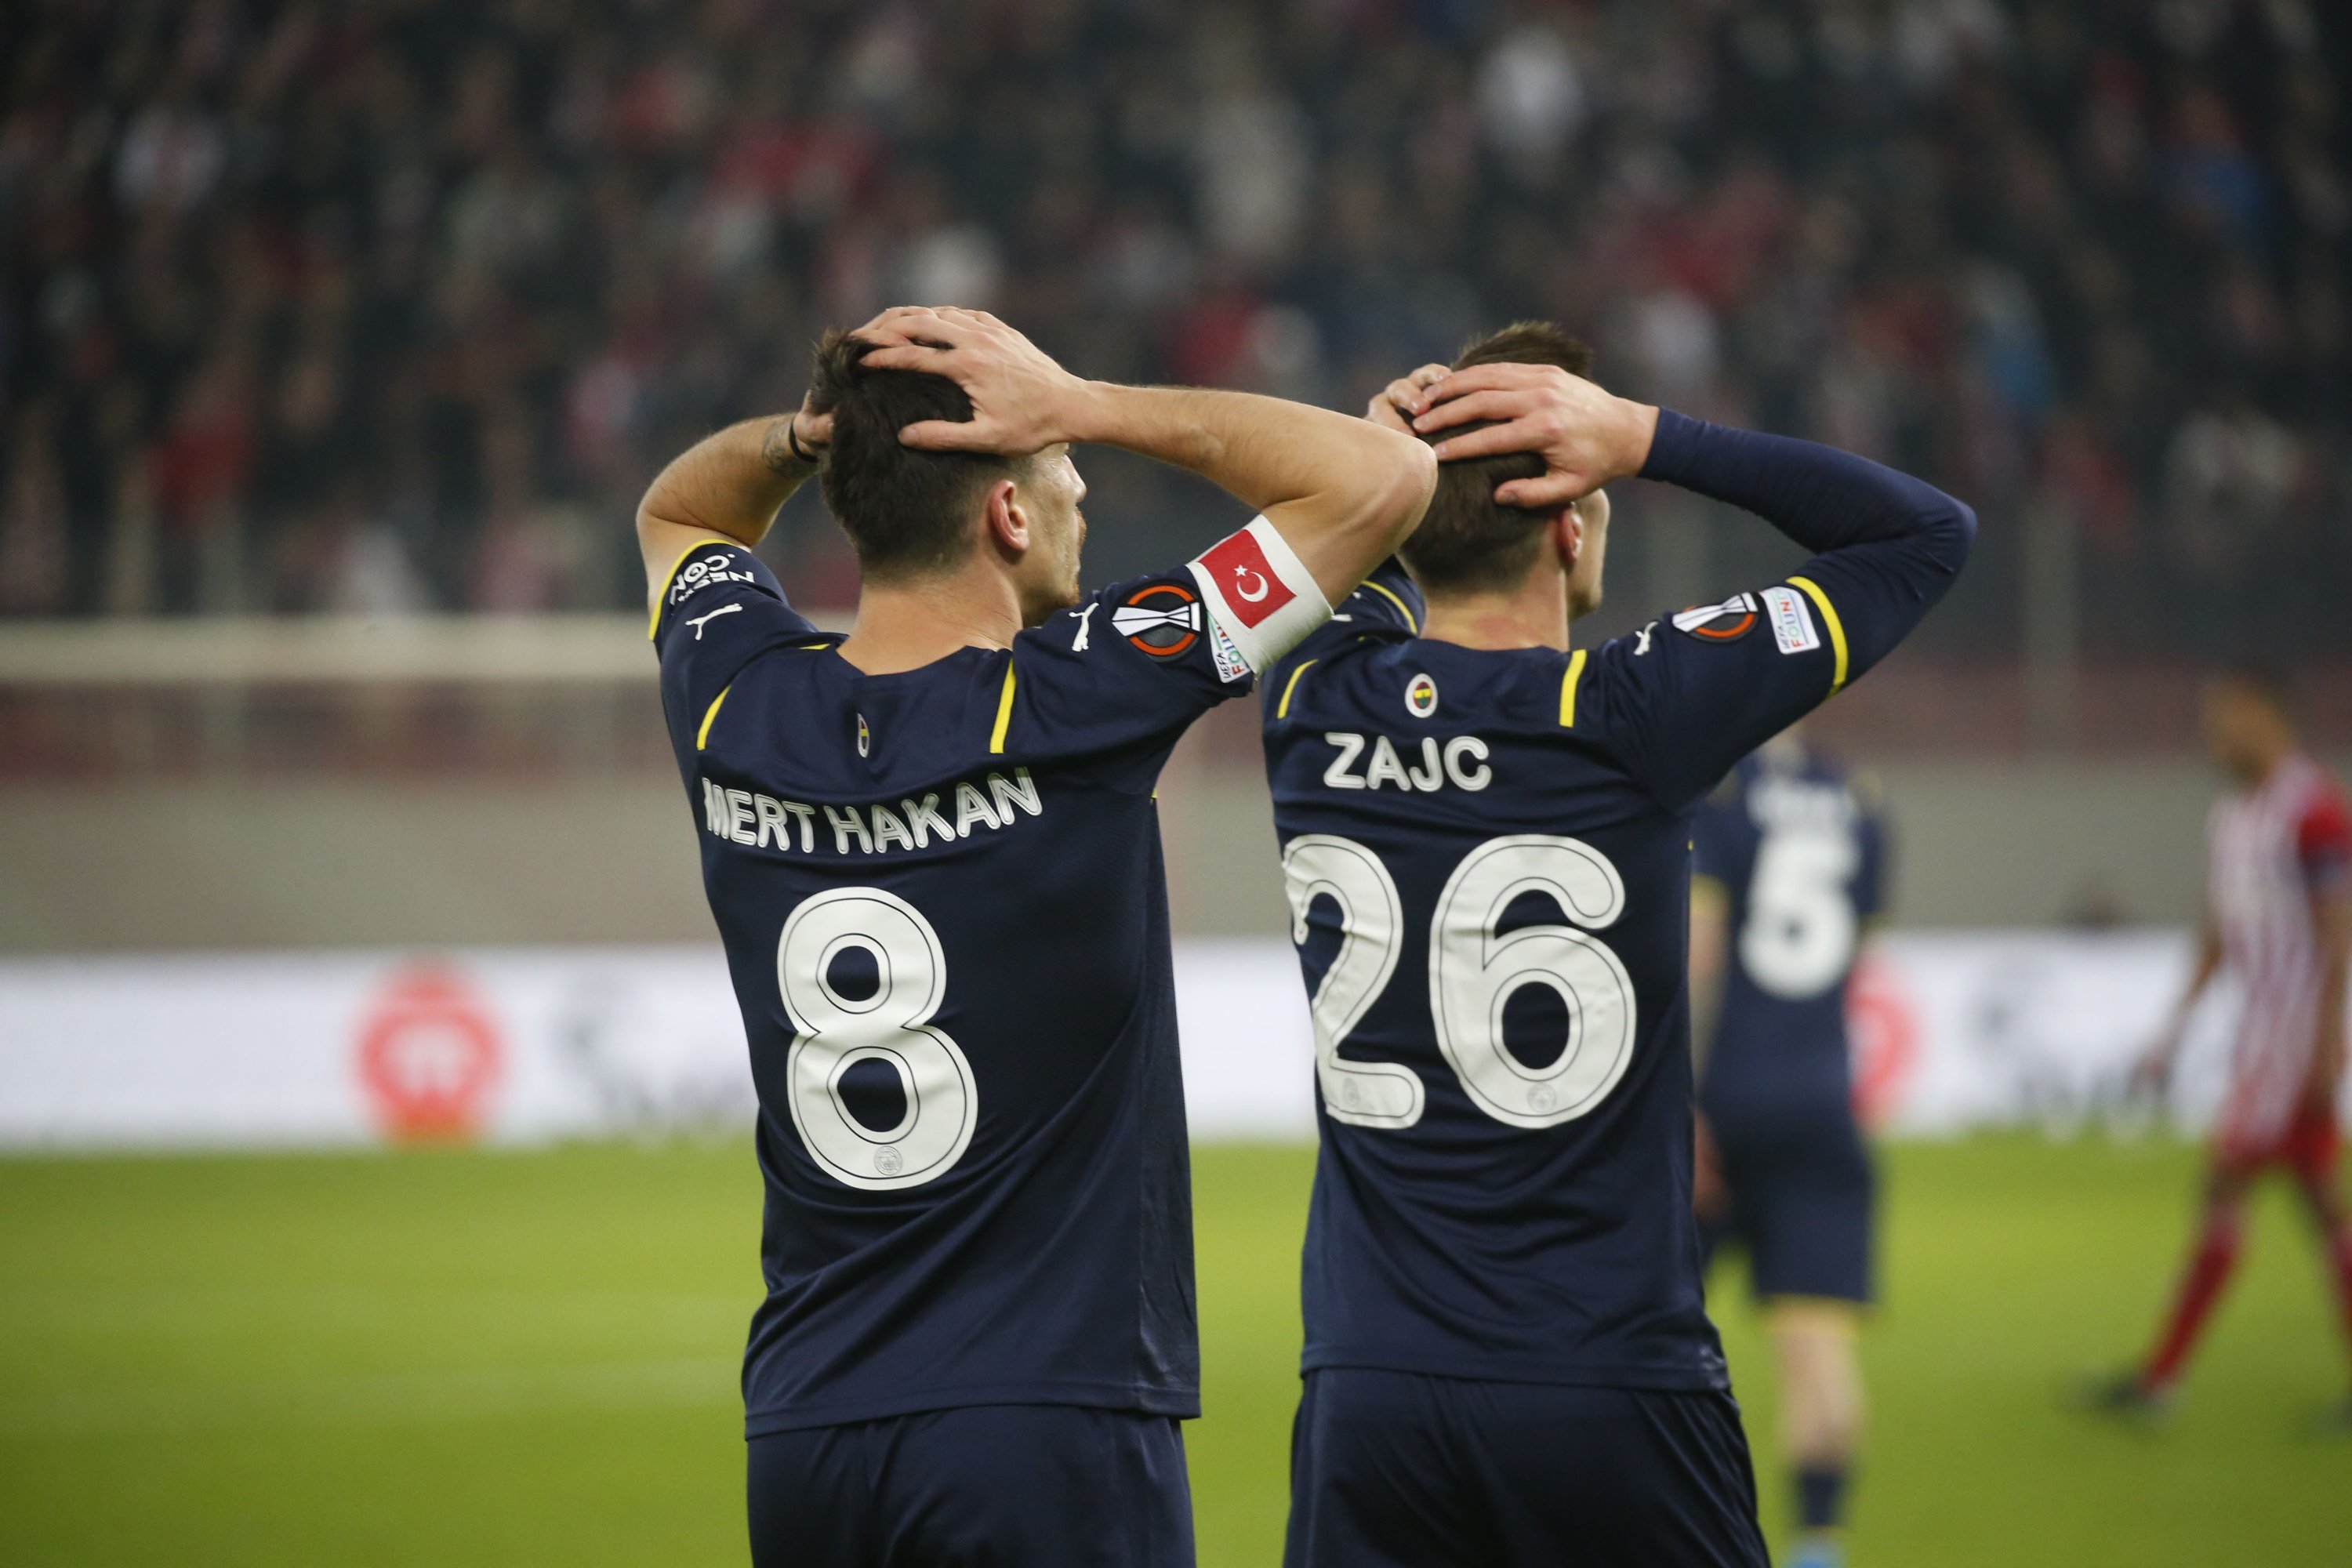 Fenerbahçe players react during a Europa League match against Olympiacos in Pireas, Greece, Nov. 25, 2021. (DHA Photo)